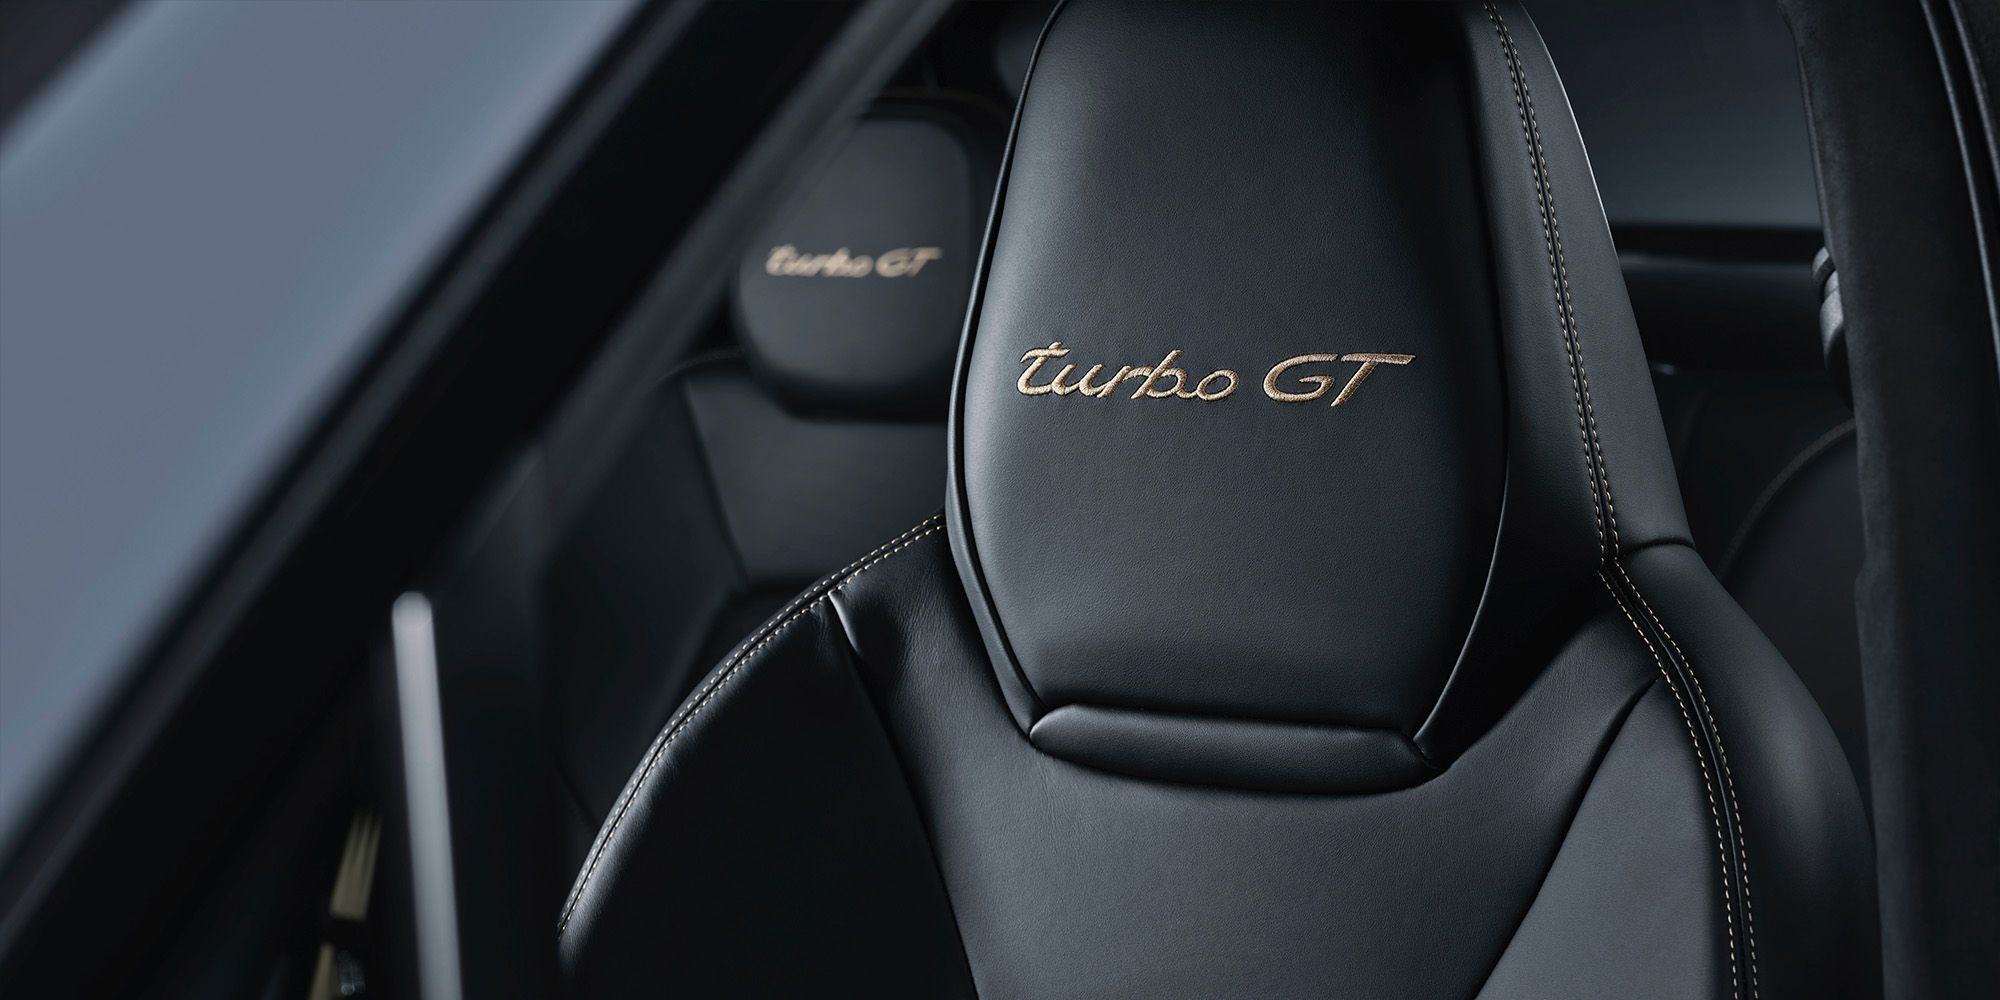 The unique seat embroidery on the Turbo GT